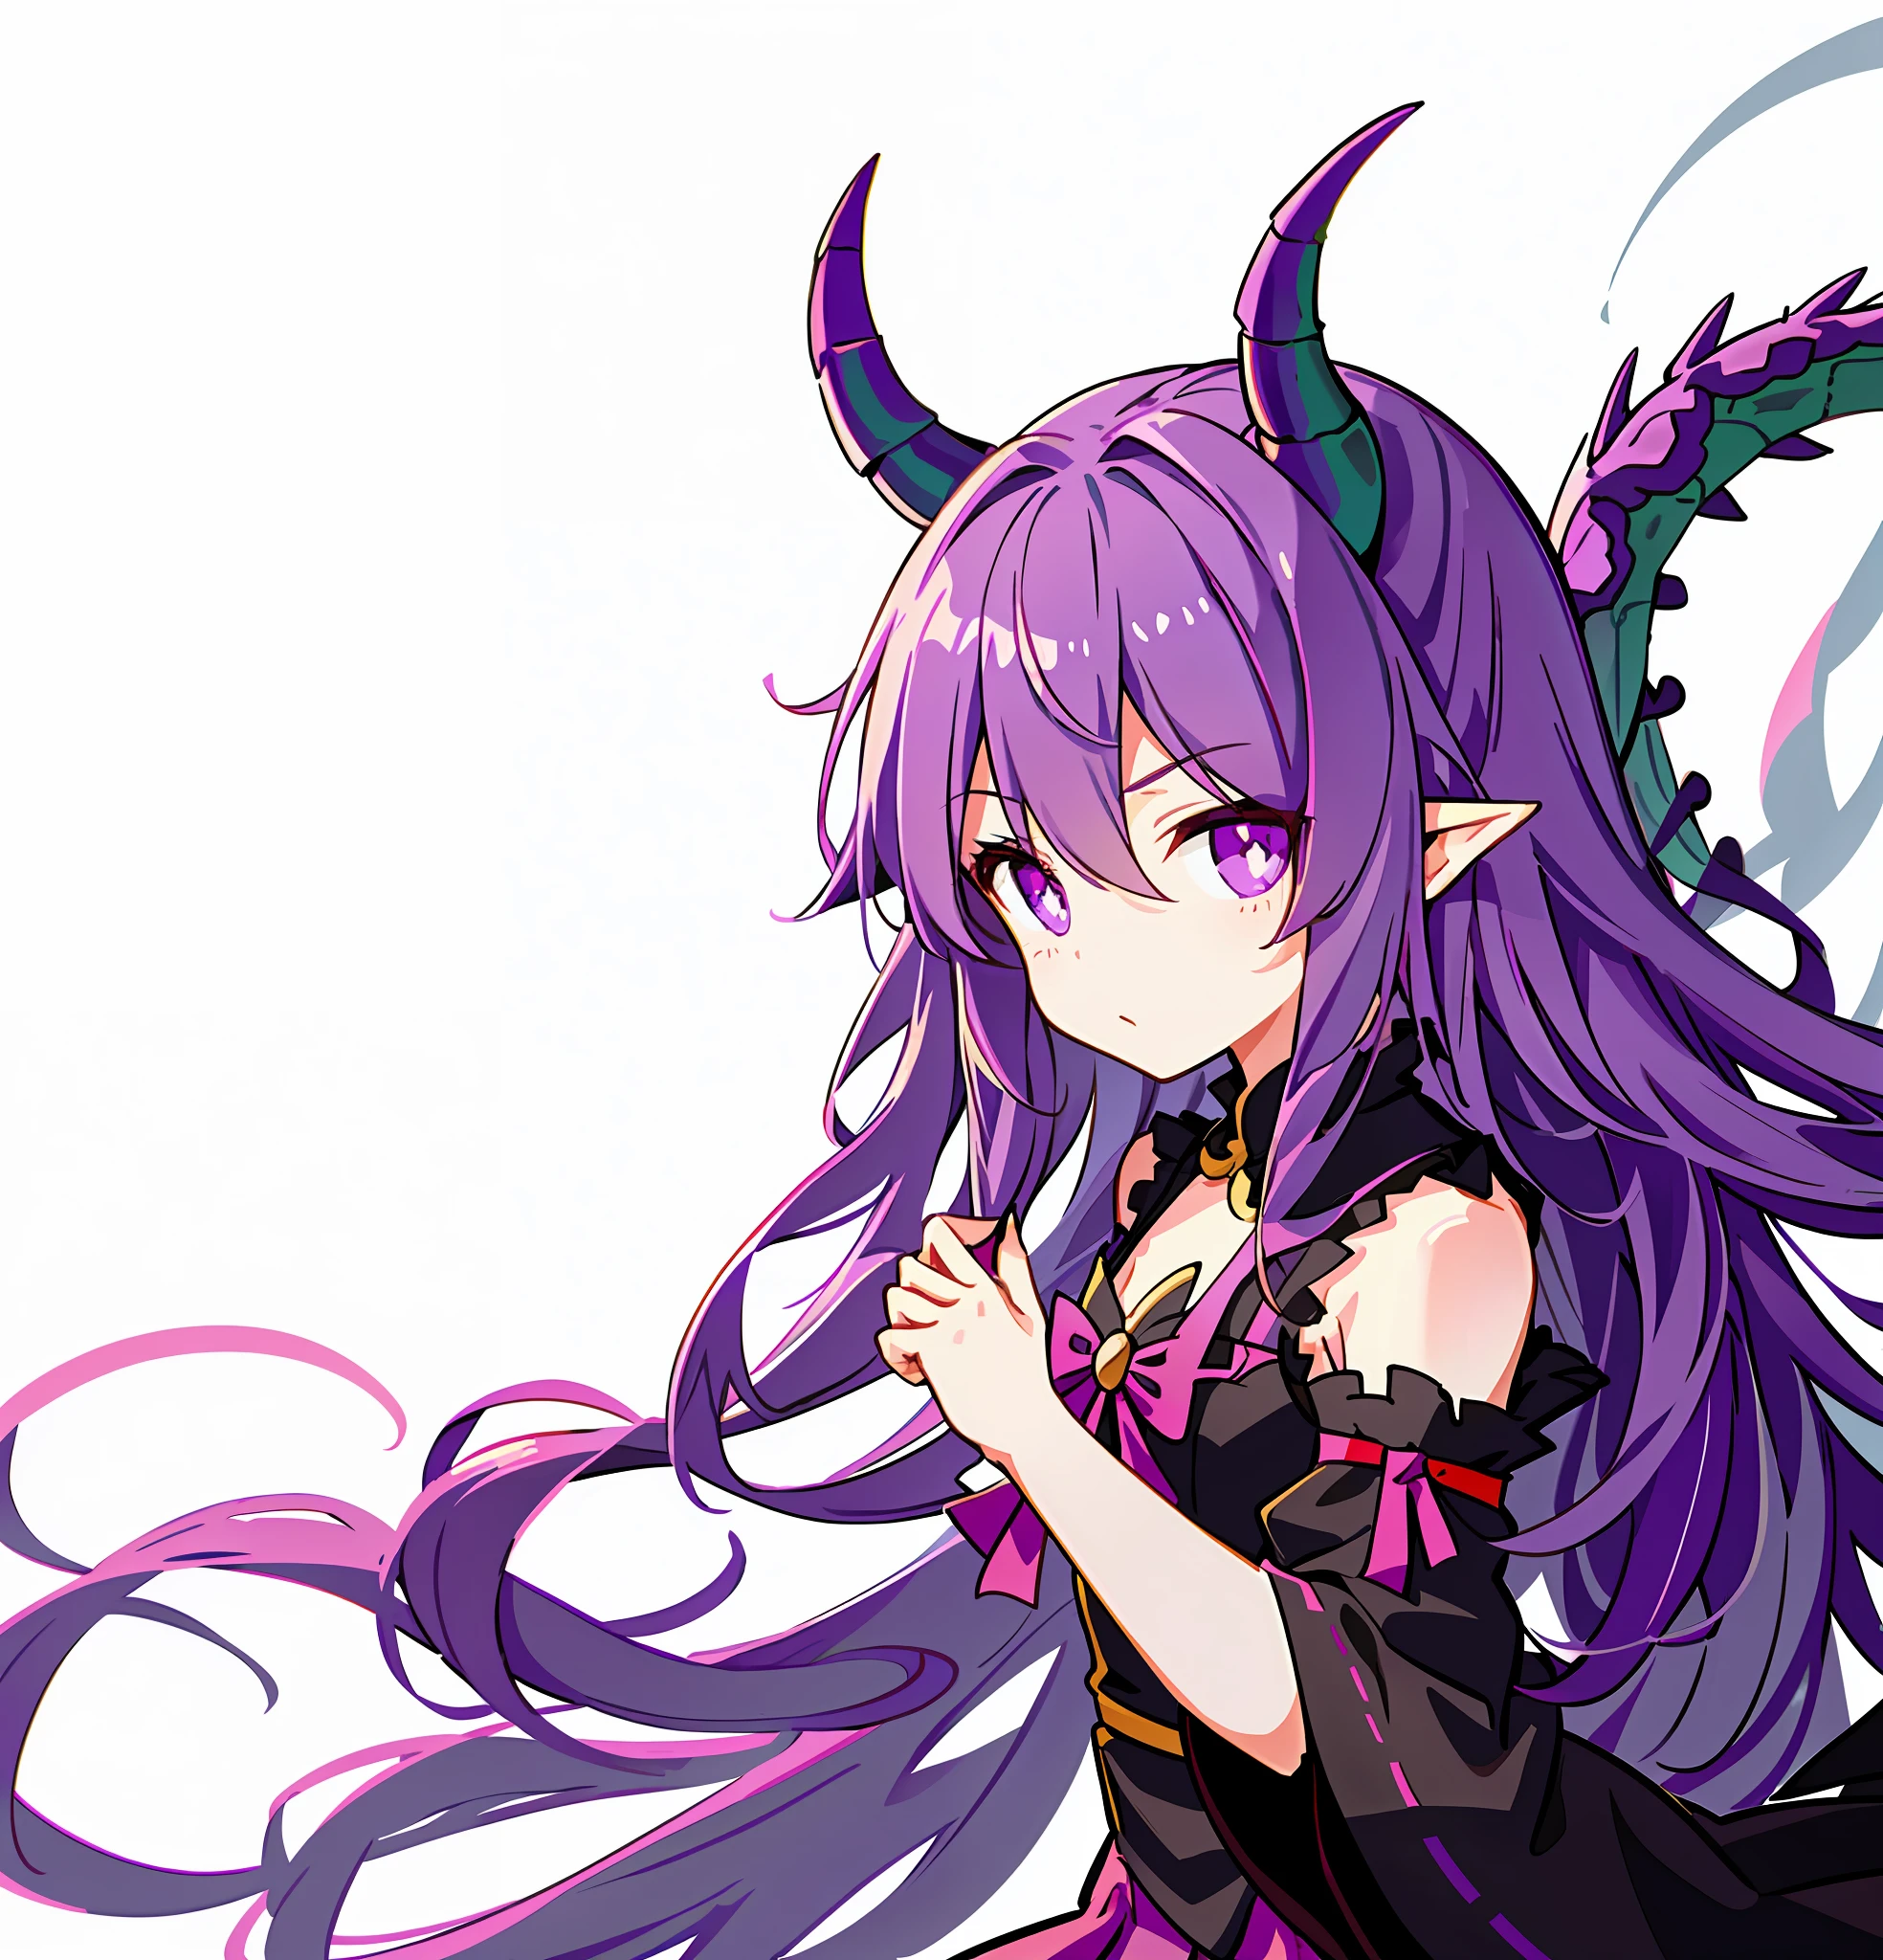 Draw a girl with a dragon's tail and dragon horns, Cute anime dragon girl, Anime Dragon Girl Cute!! tchibi!!! thick lineart, Purple-haired dragon girl, DDLC,, linear art, Simple lines of art, flat anime style shading, holding a pudica pose，vestindo vestido longo。